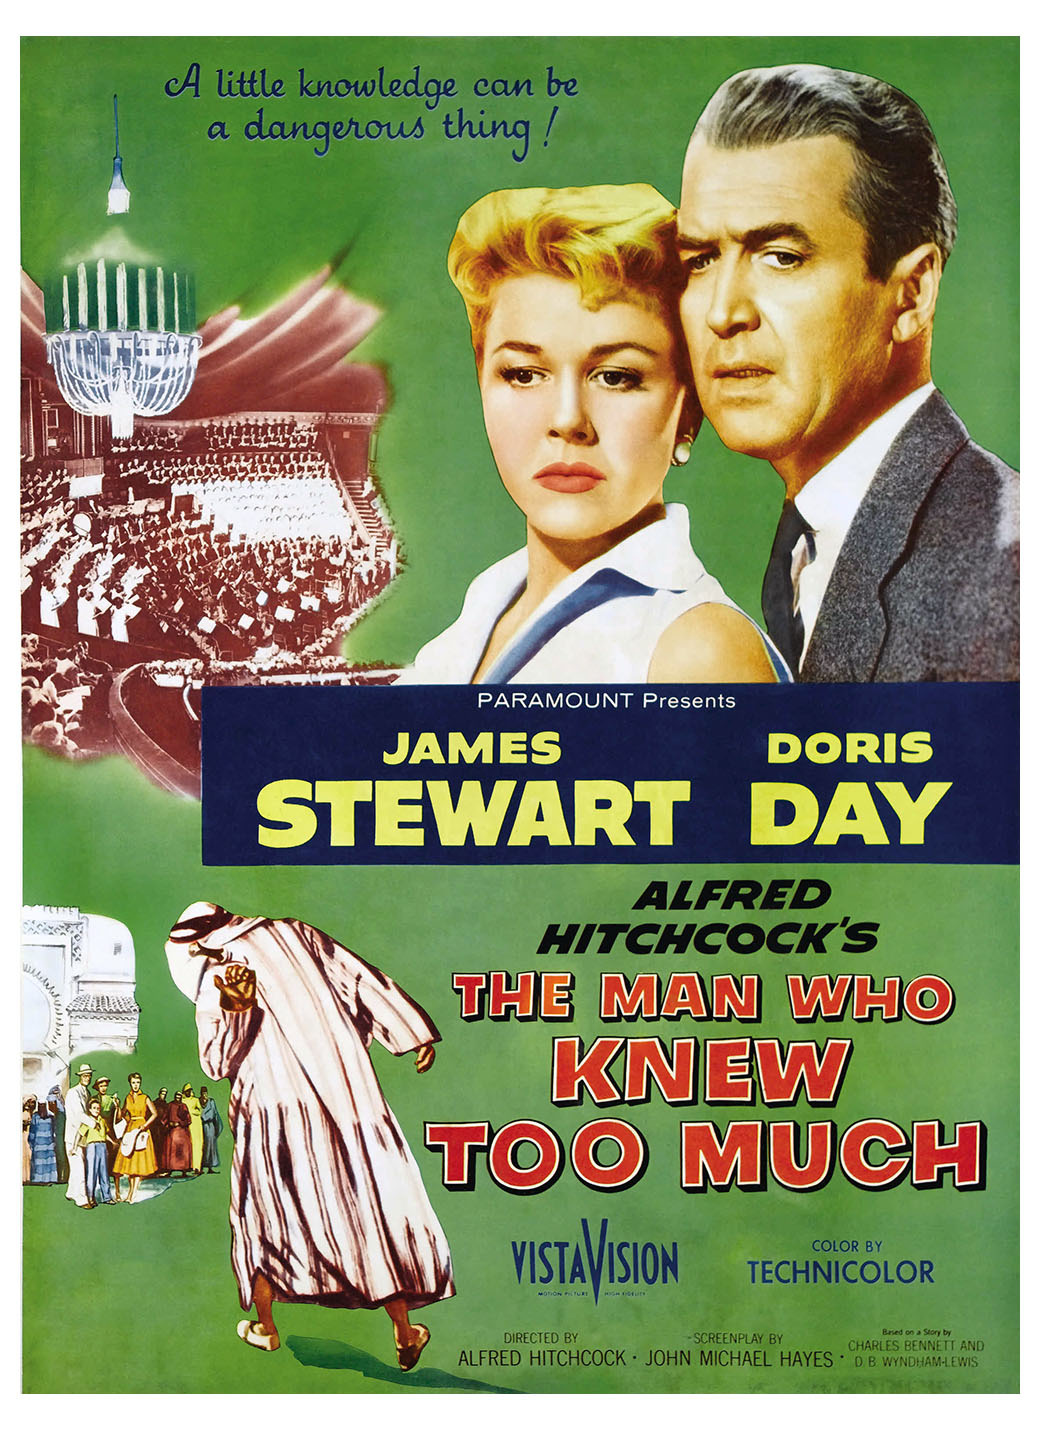 The Man Who Knew Too Much 1956 Full Movie - YouTube